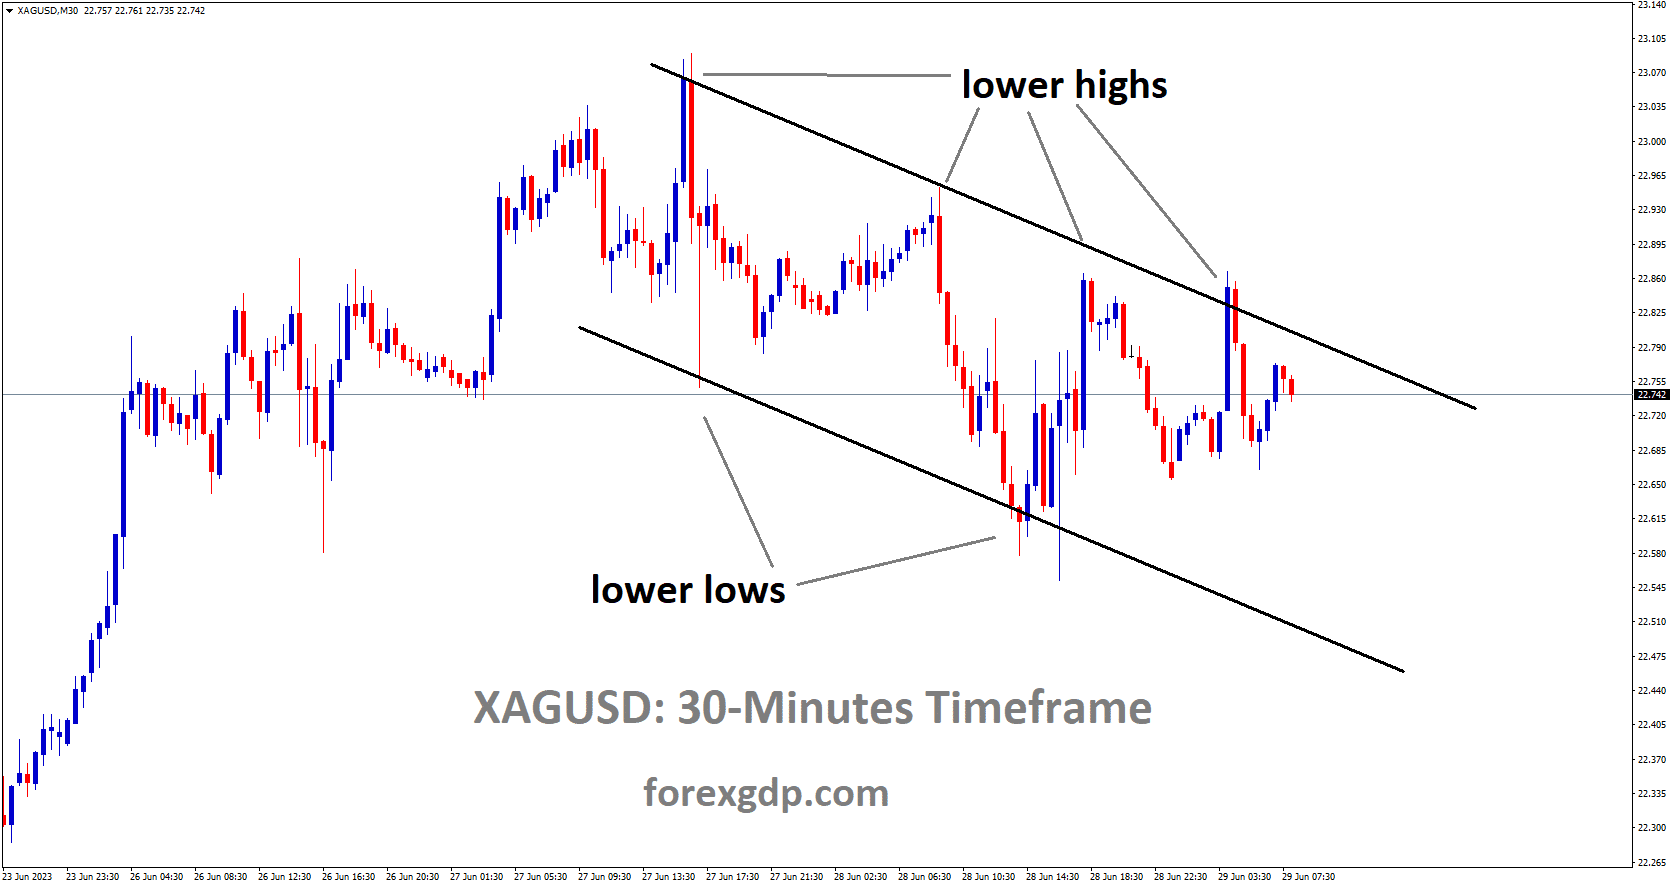 XAGUSD Silver is moving in descending channel pattern and the market has reached the lower high area of the channel.